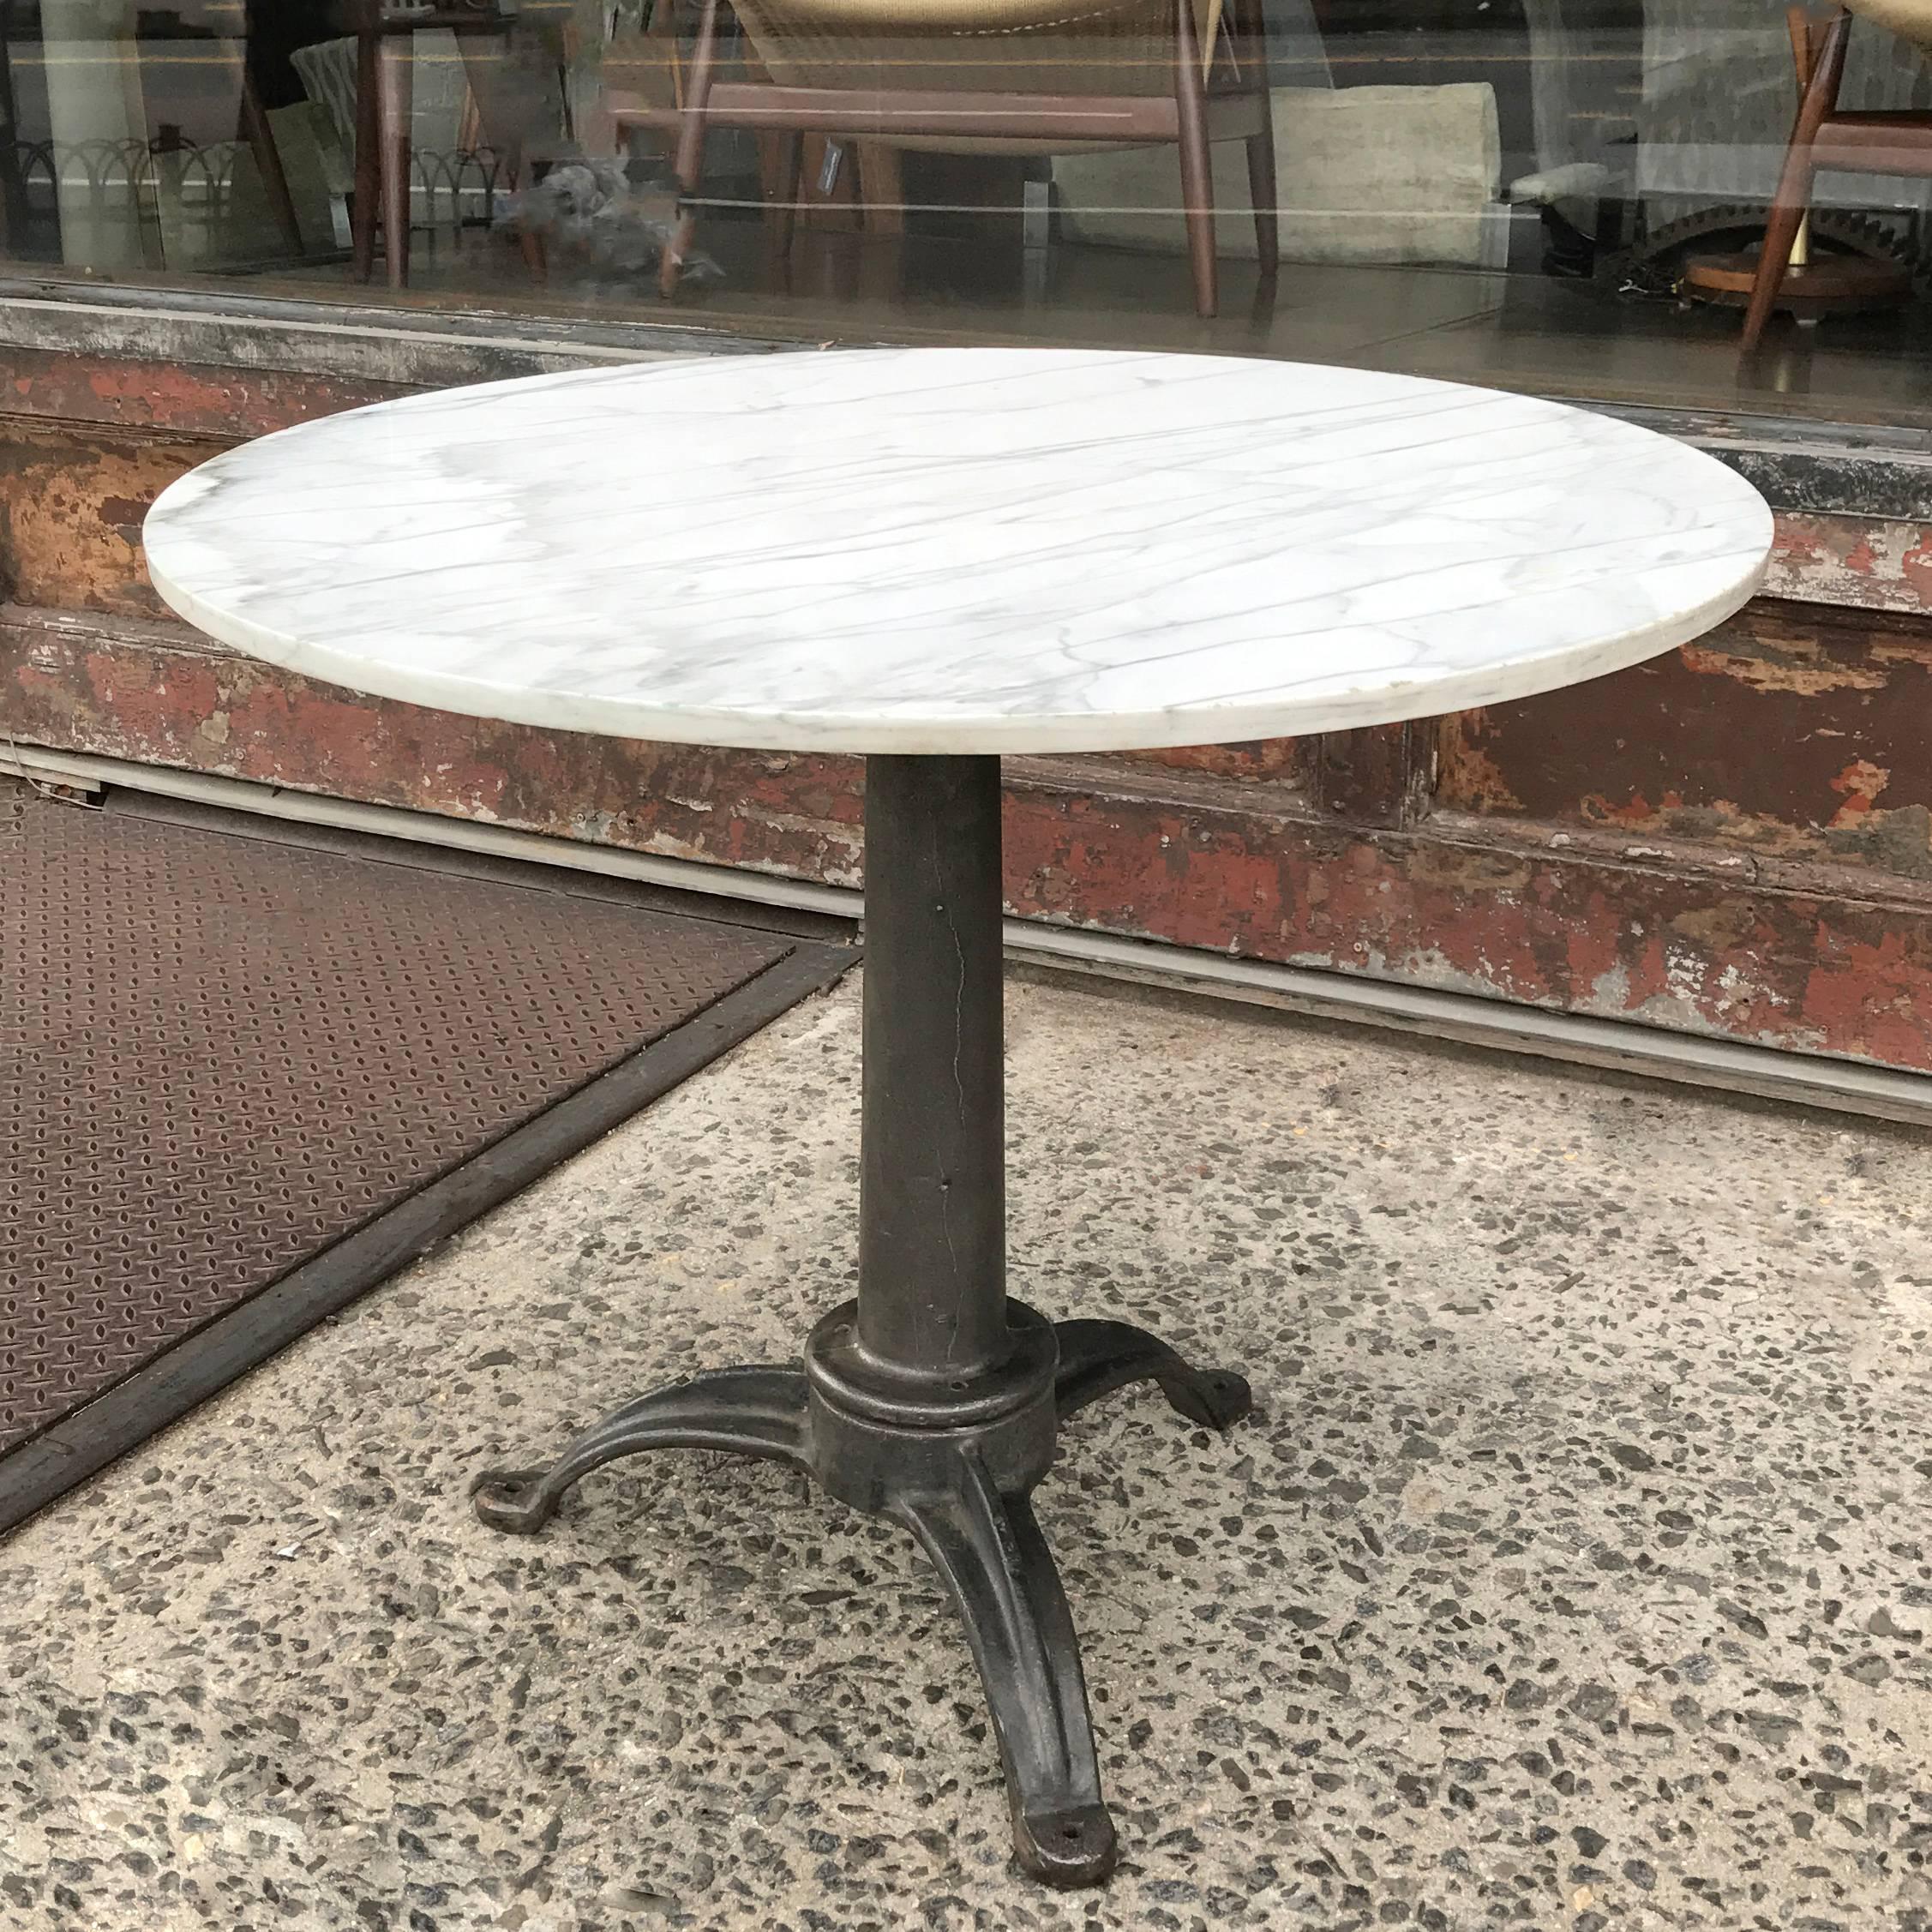 Round, gray and white grain, marble, café dining table with Industrial cast iron pedestal base. Pedestal footprint is 23in. x 23in.